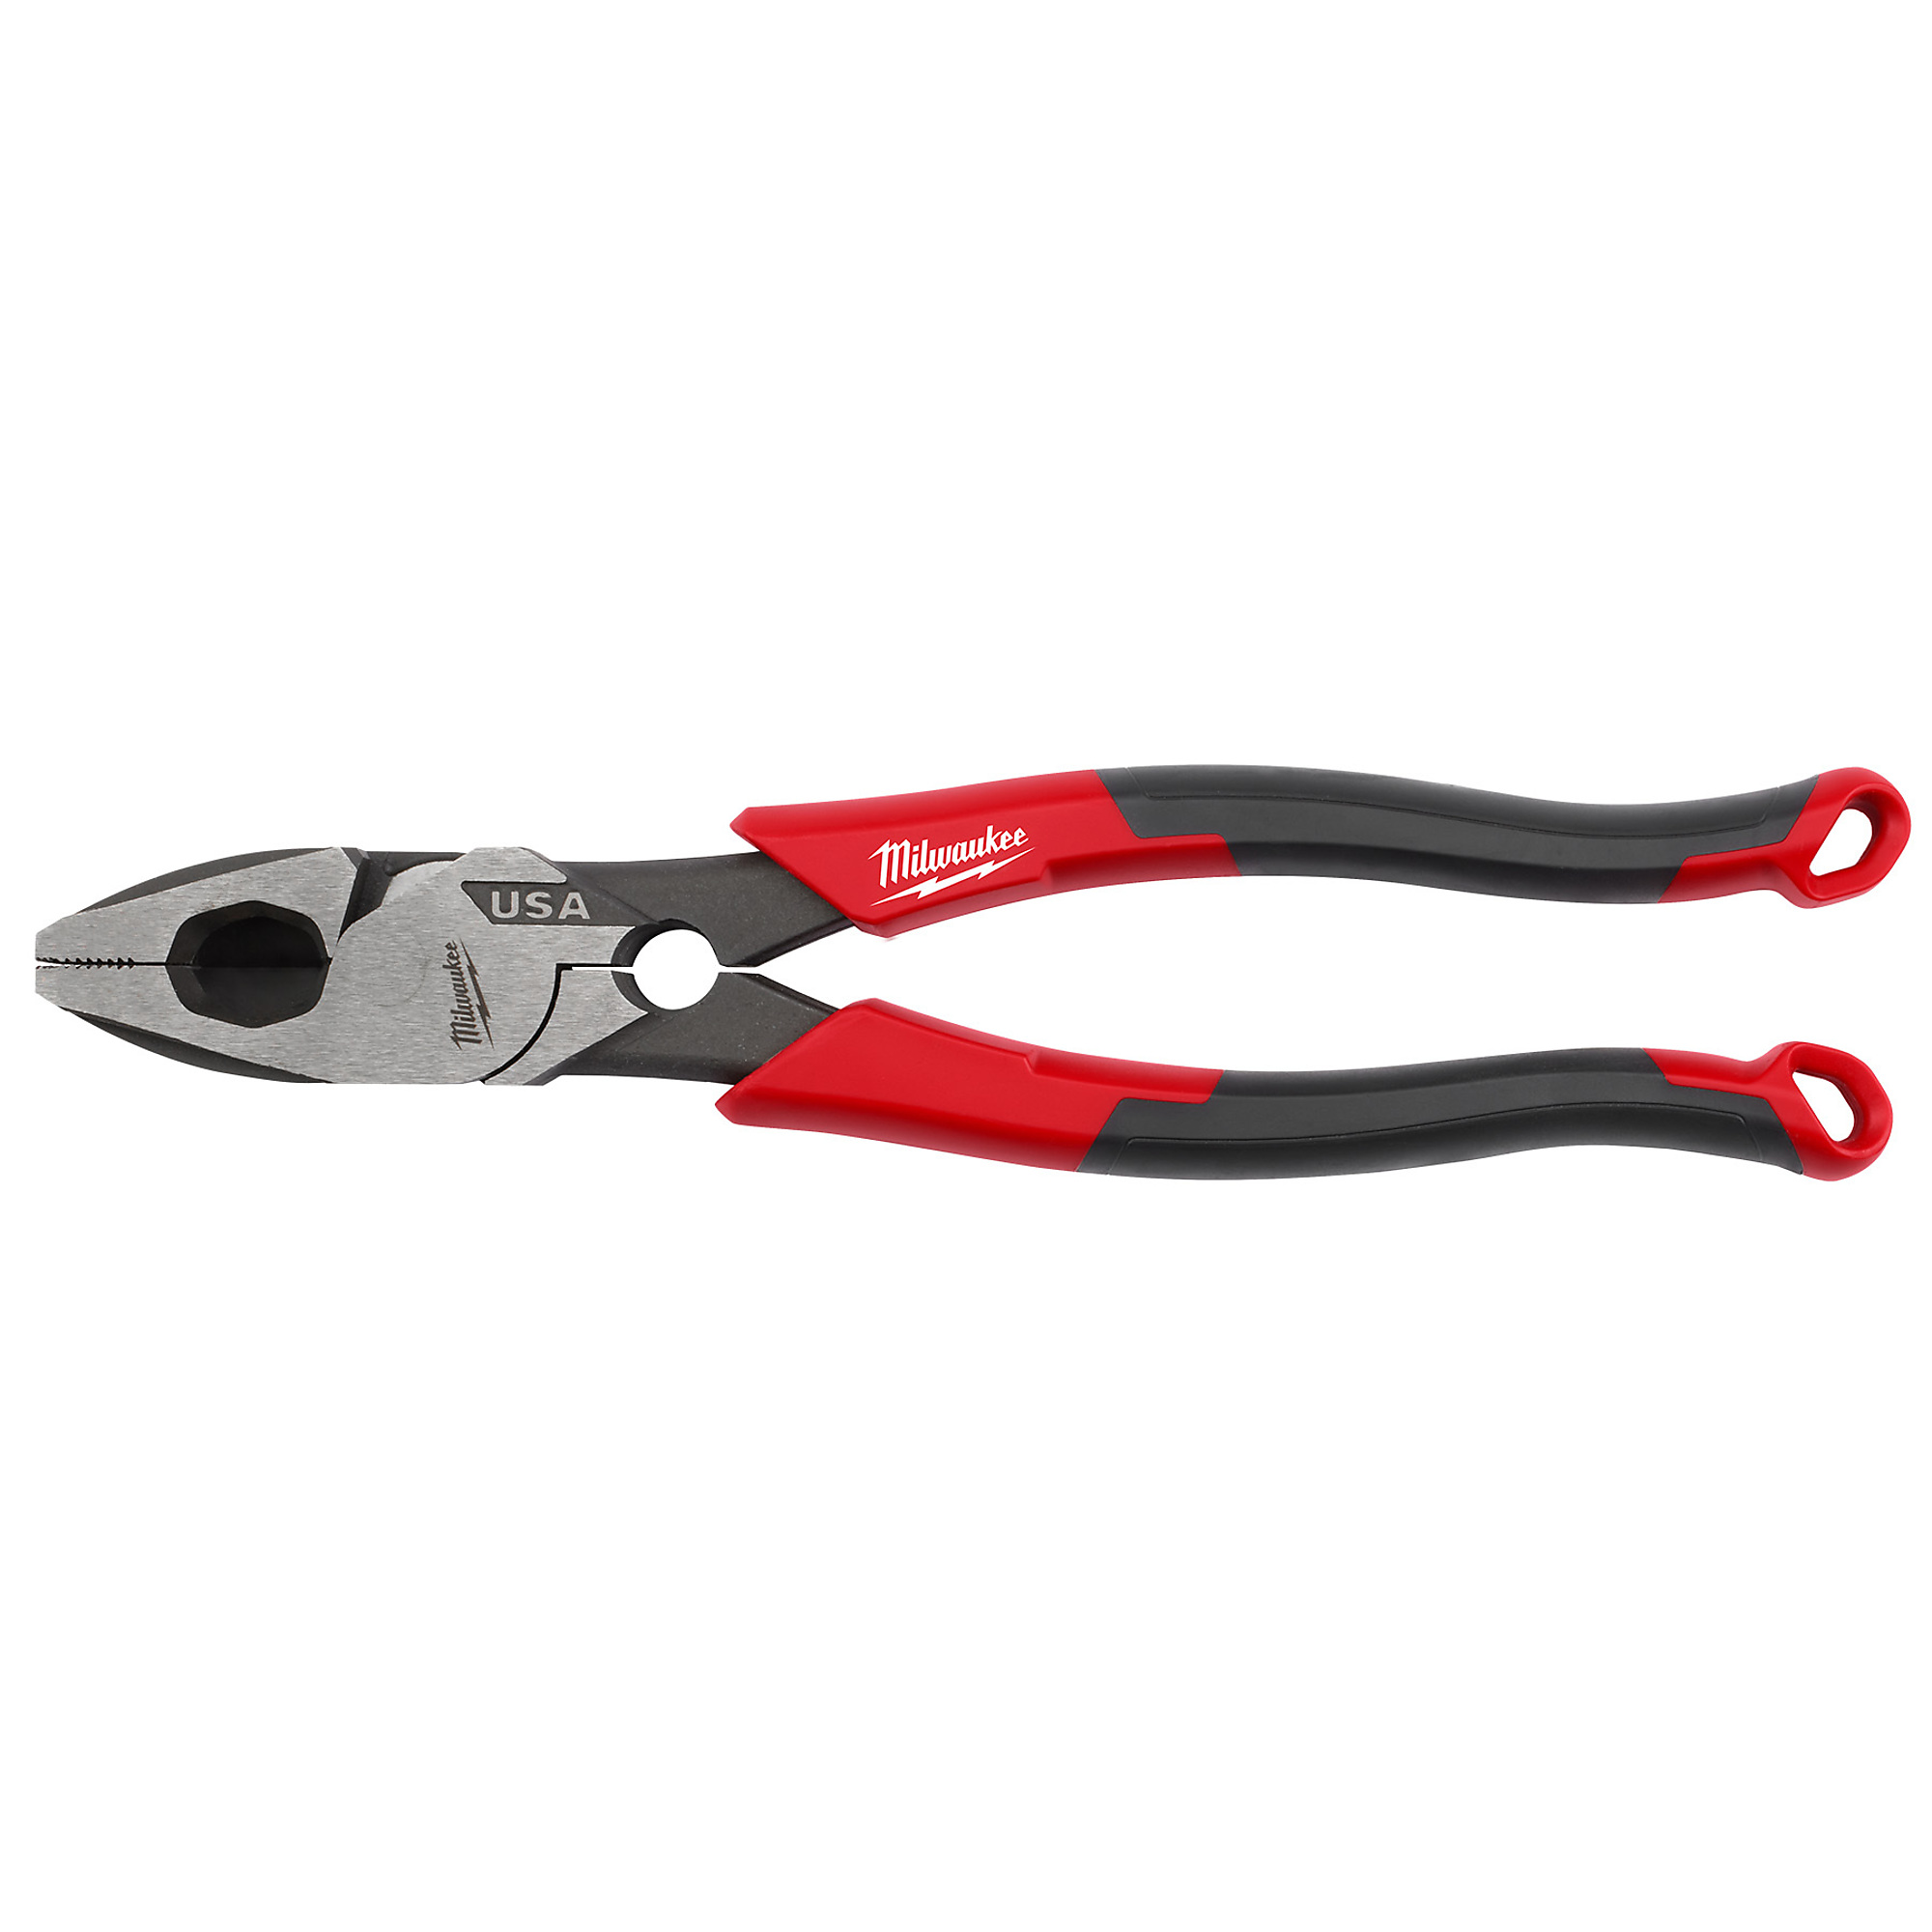 Milwaukee, 9Inch Lineman Comfort Plier W/ Tc USA, Pieces (qty.) 1, Material Steel, Model MT550T